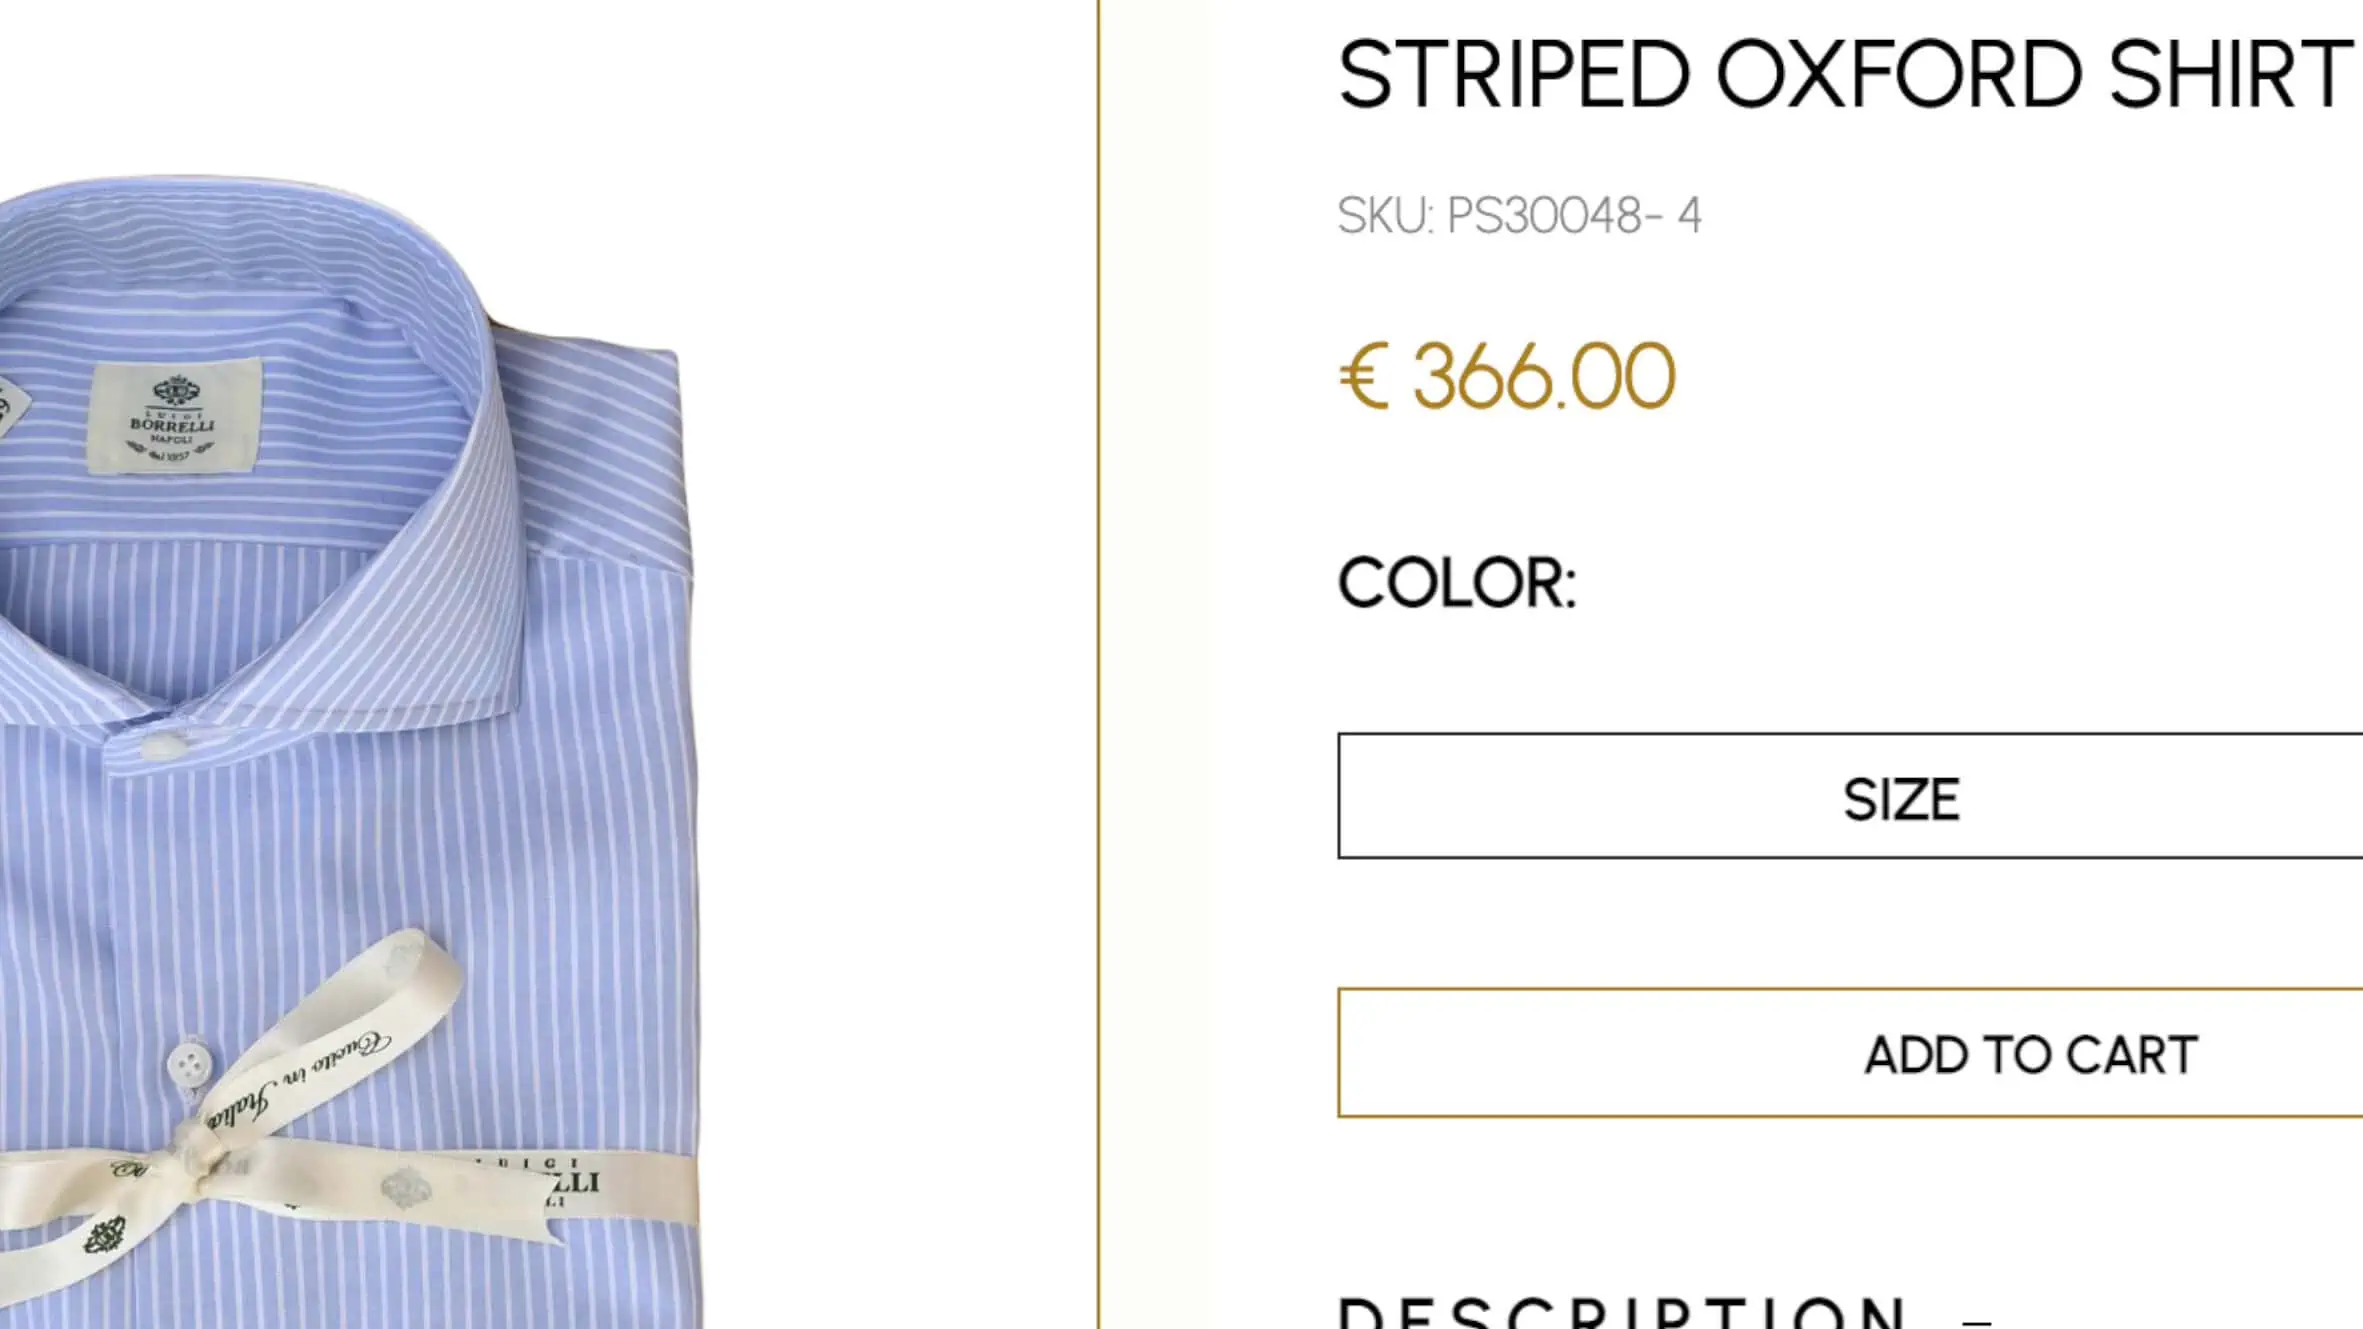 Borrelli's Italian blue and white striped shirt could cost around €300 or more.